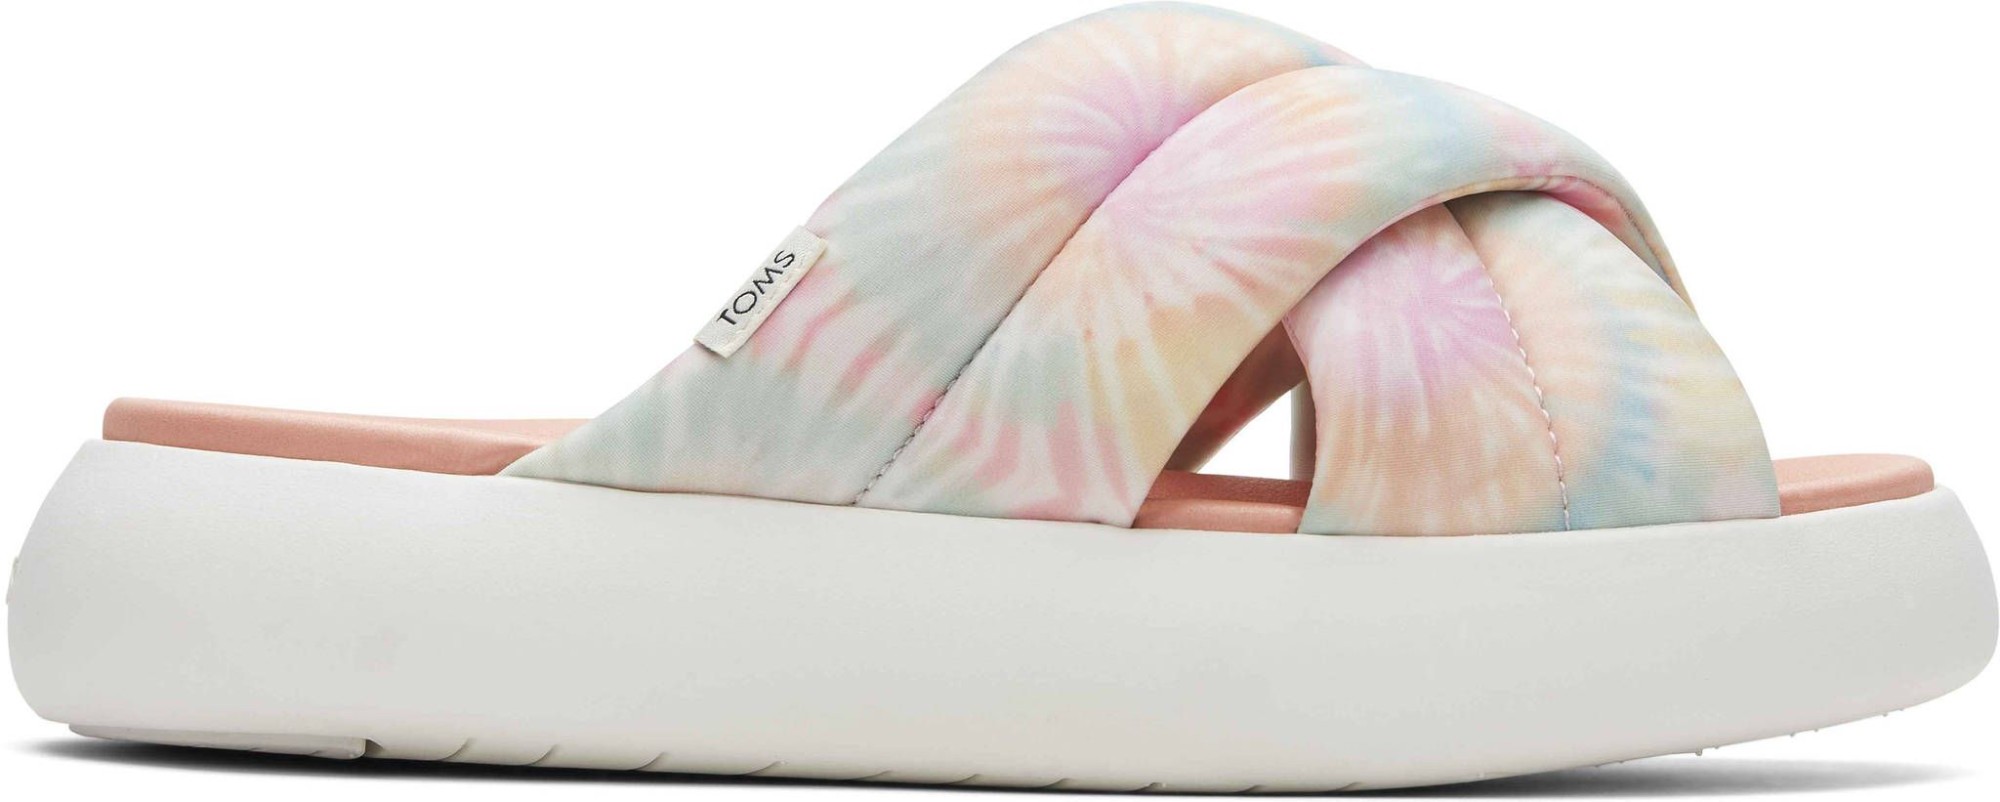 TOMS TieDye Repreve Jersey Mallow Crossover Sandal Candy Pink 37,5